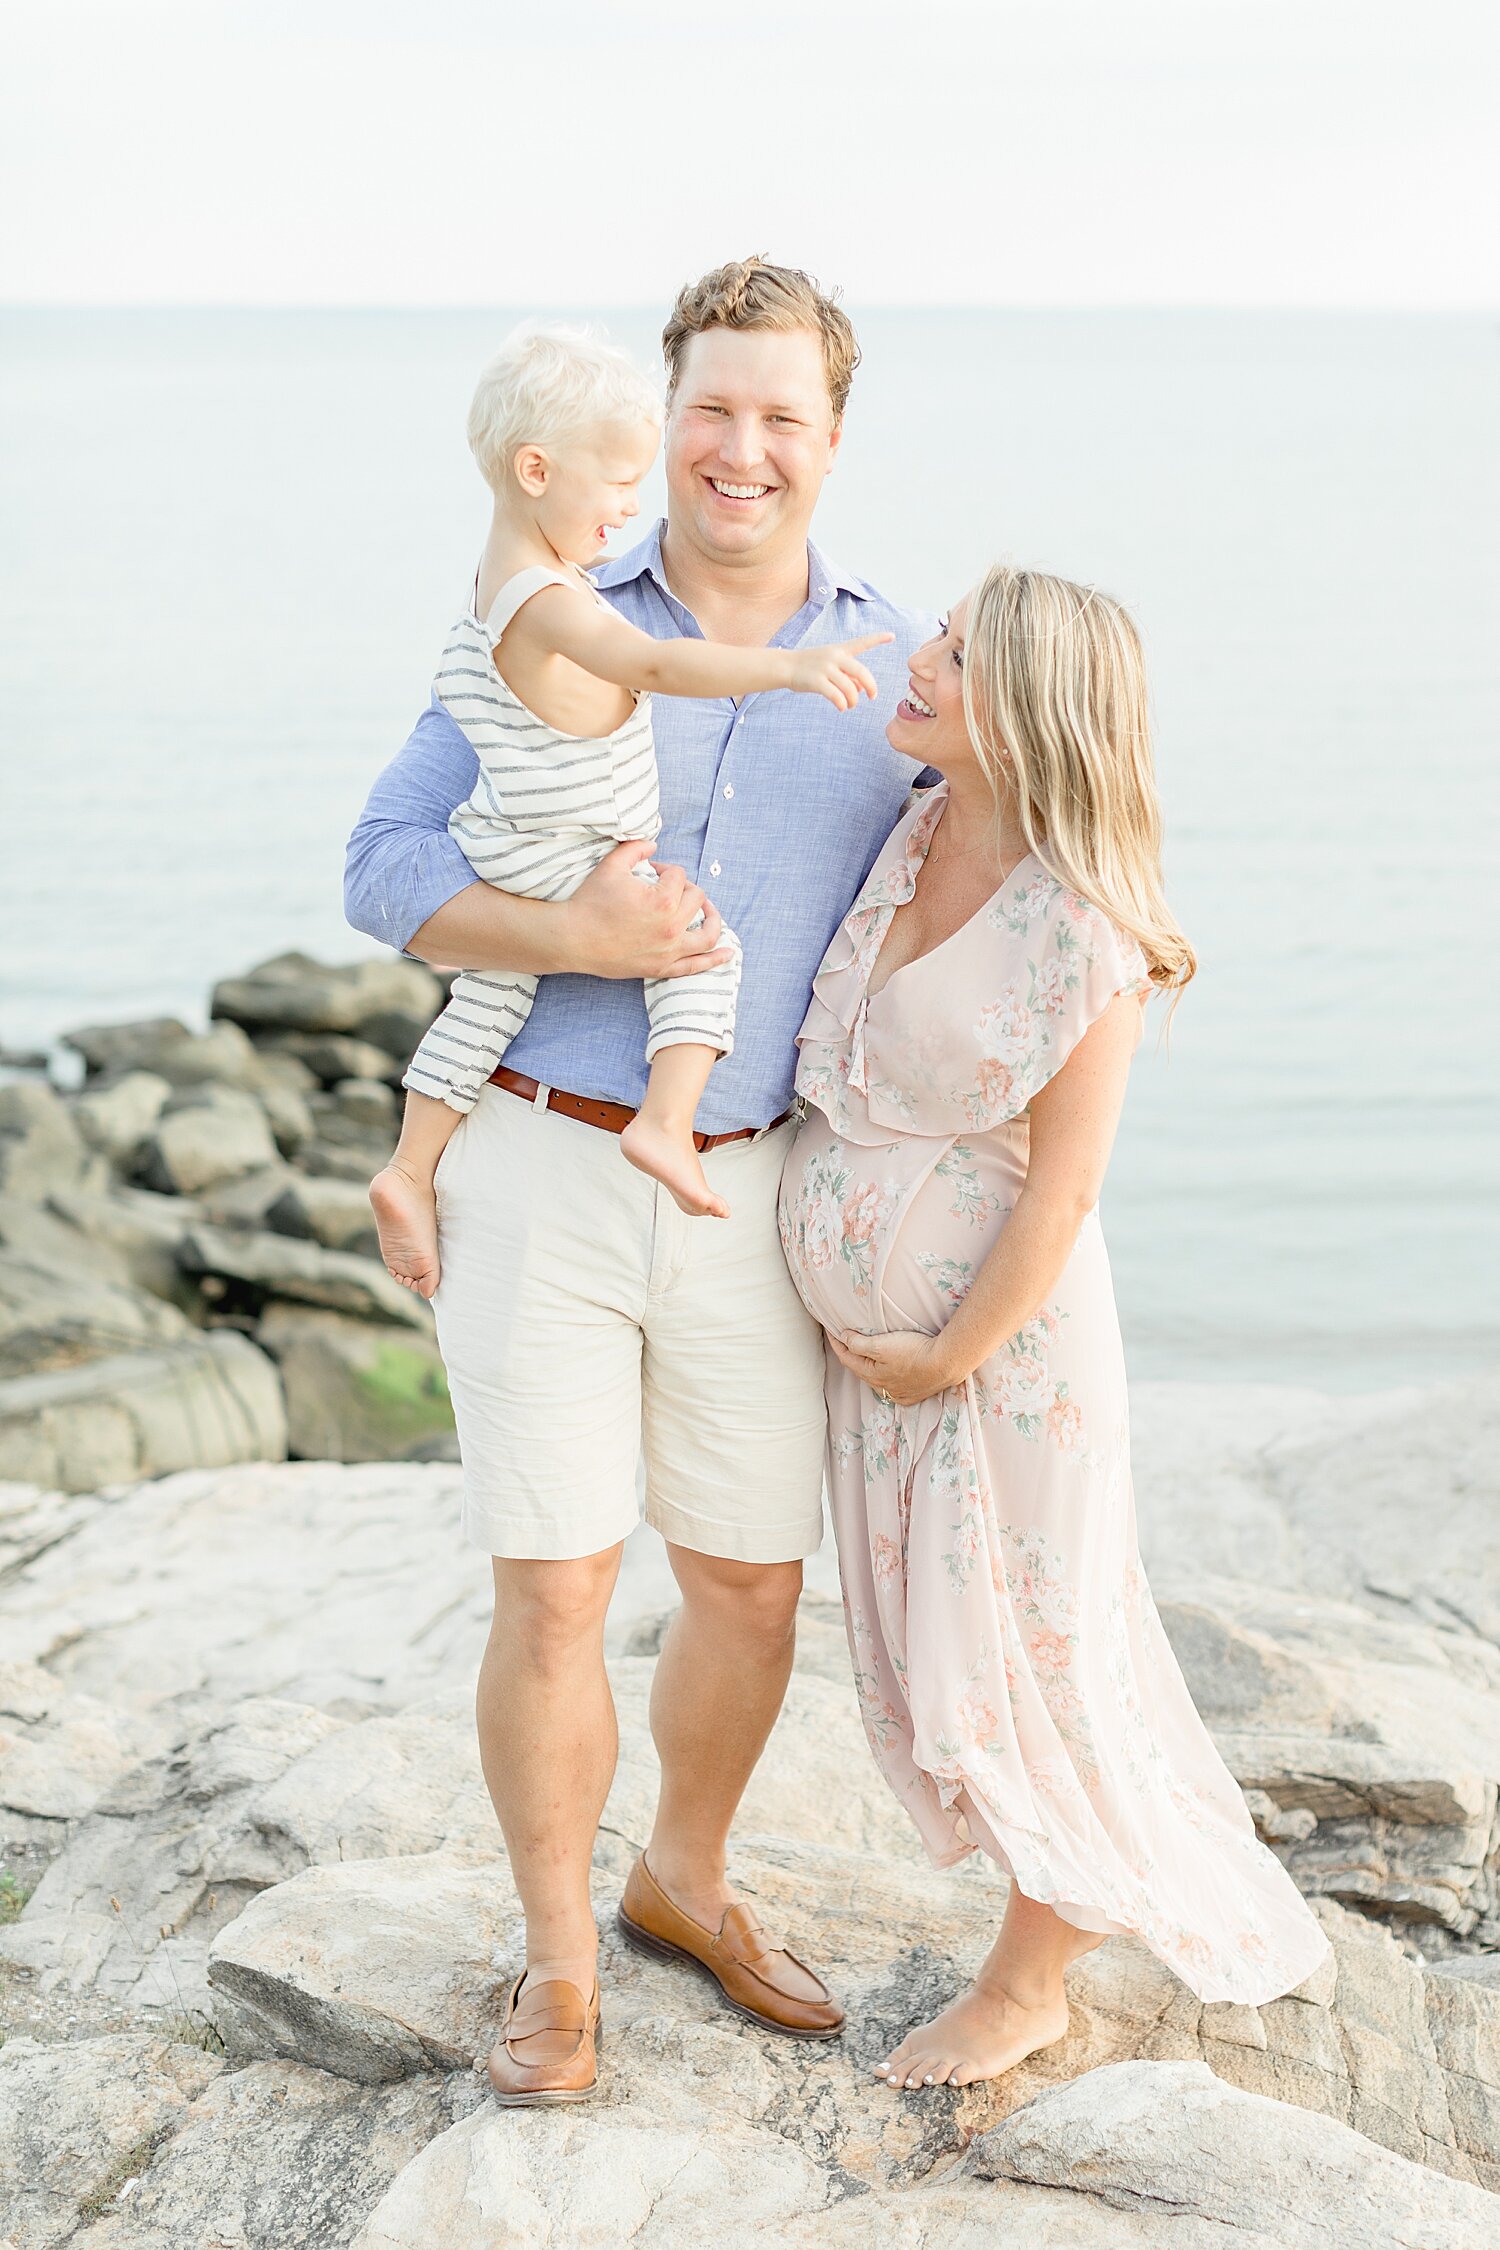 Family maternity session at Weed Beach in Darien, CT | Kristin Wood Photography